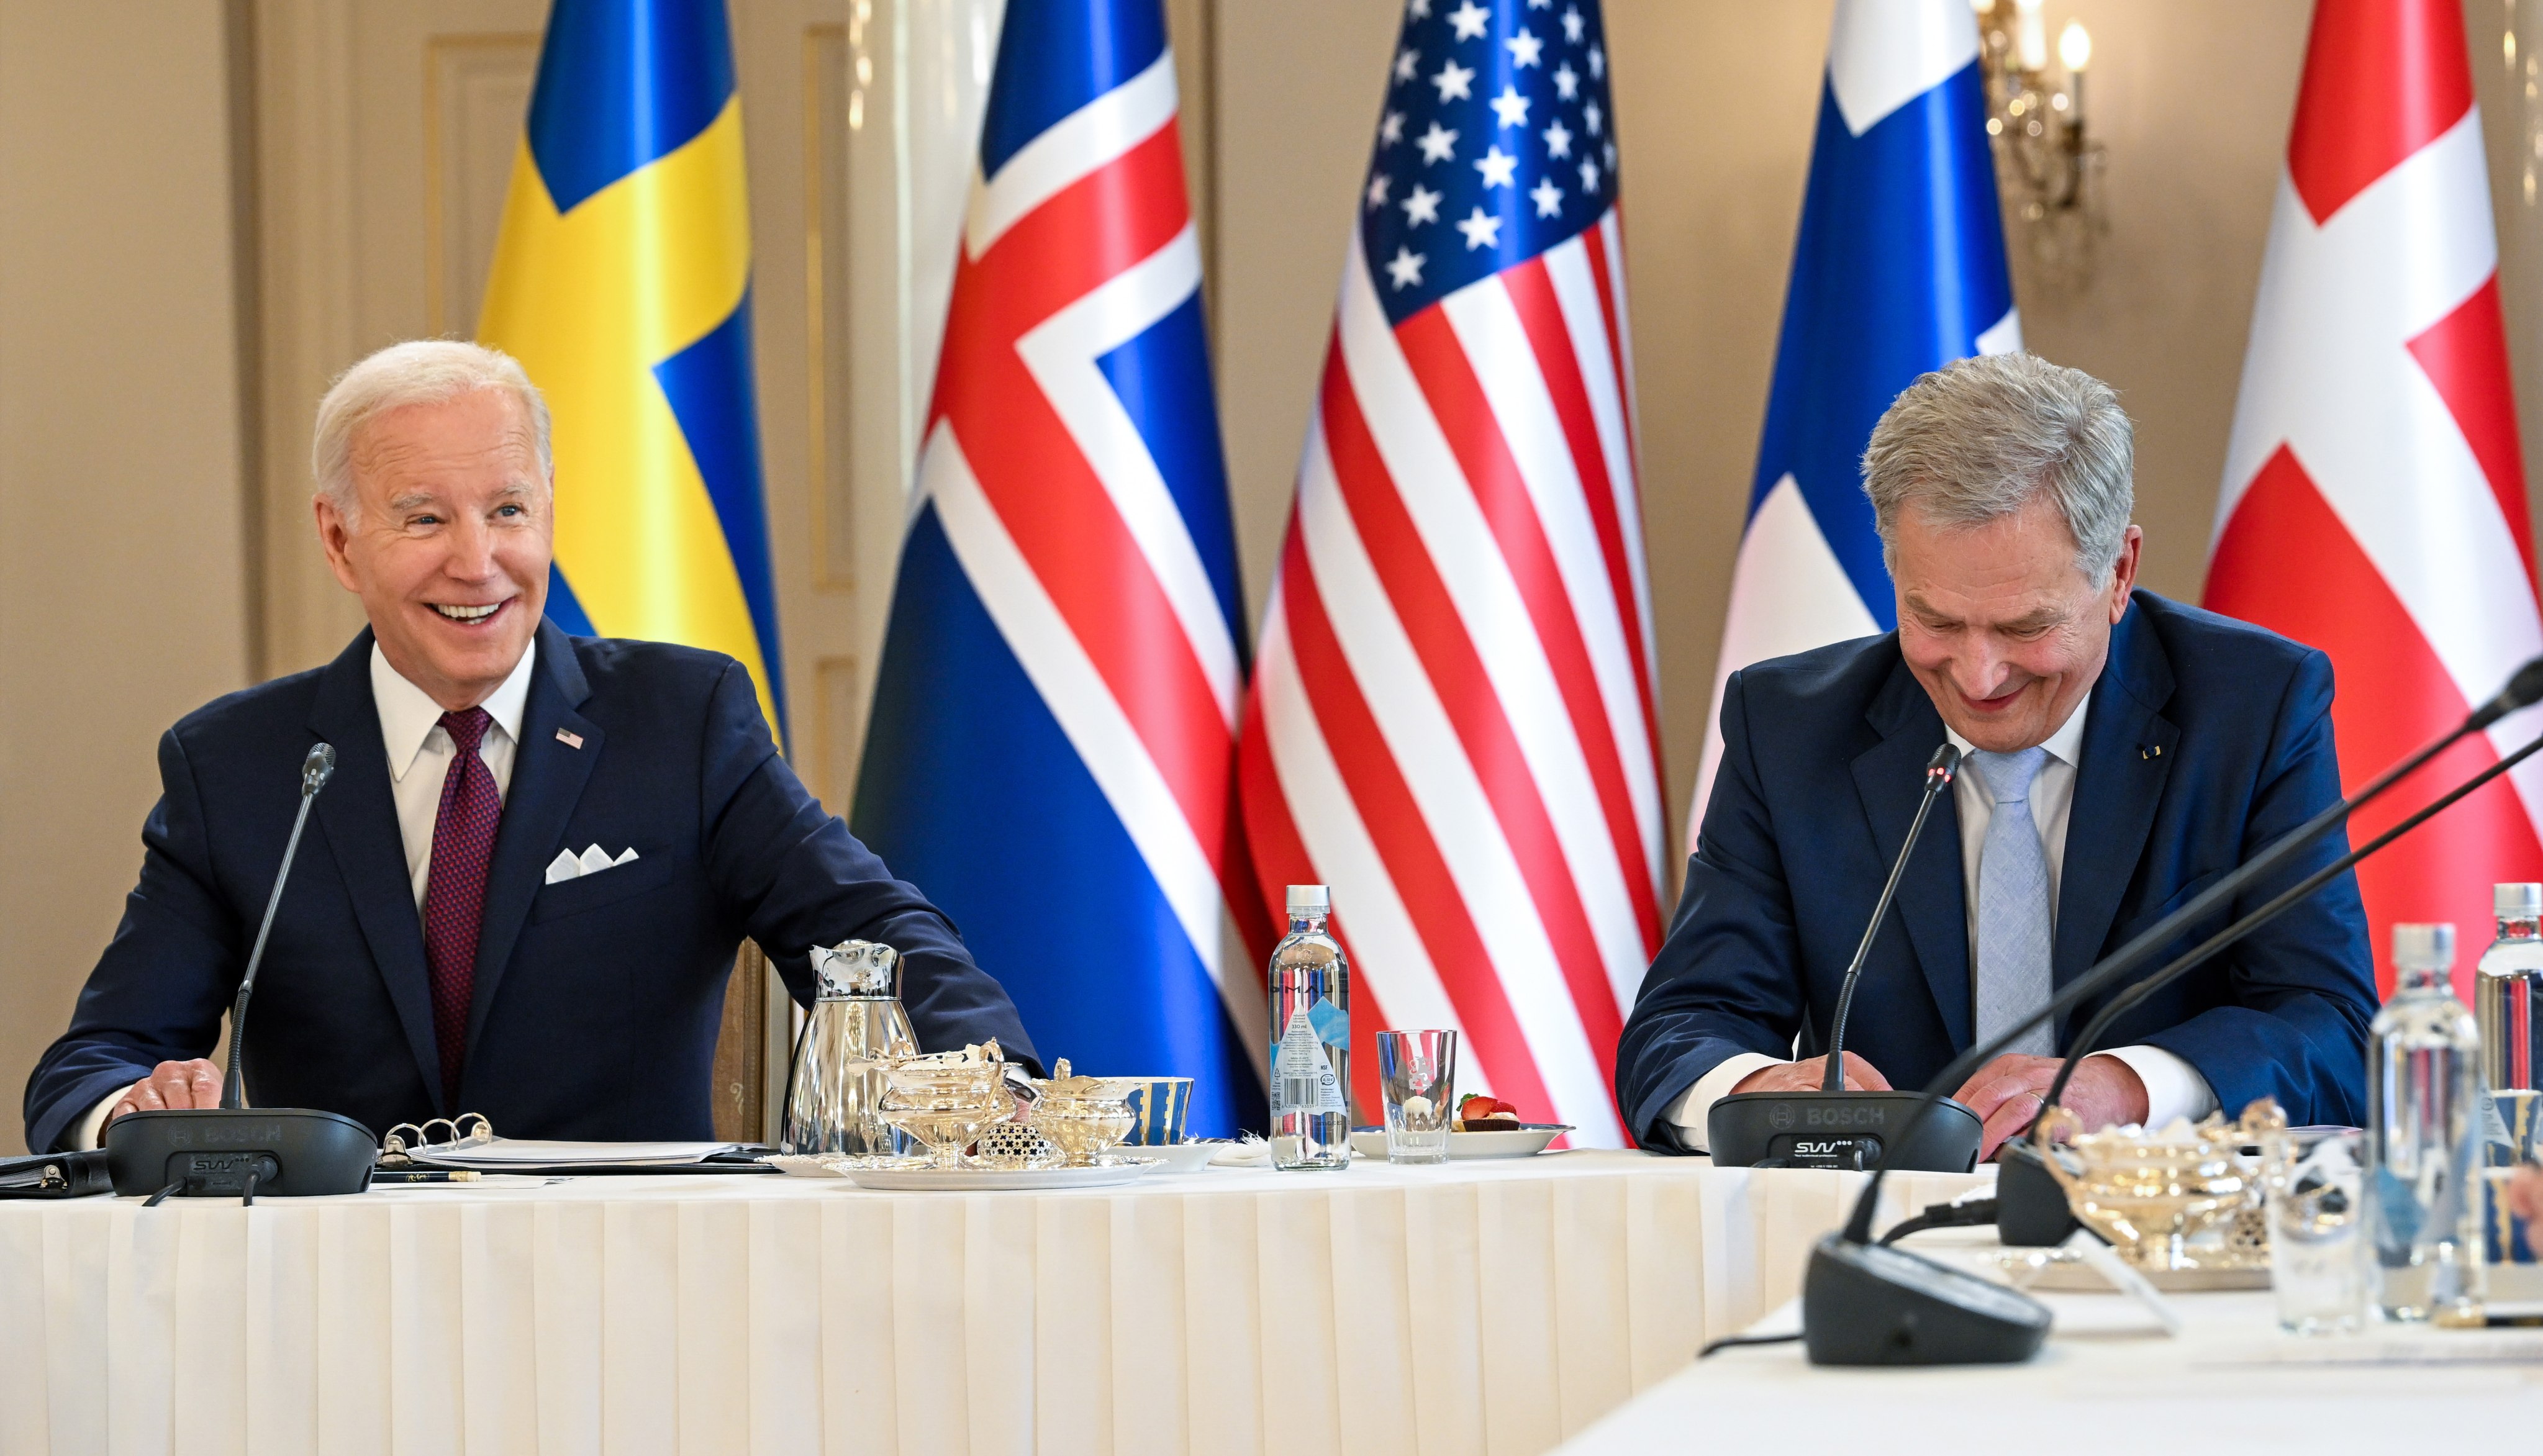 US President Joe Biden and Finland’s President Sauli Niinisto during the US-Nordic Leaders’ Summit Meeting at the Presidential Palace in Helsinki, Finland, . Photo: EPA-EFE